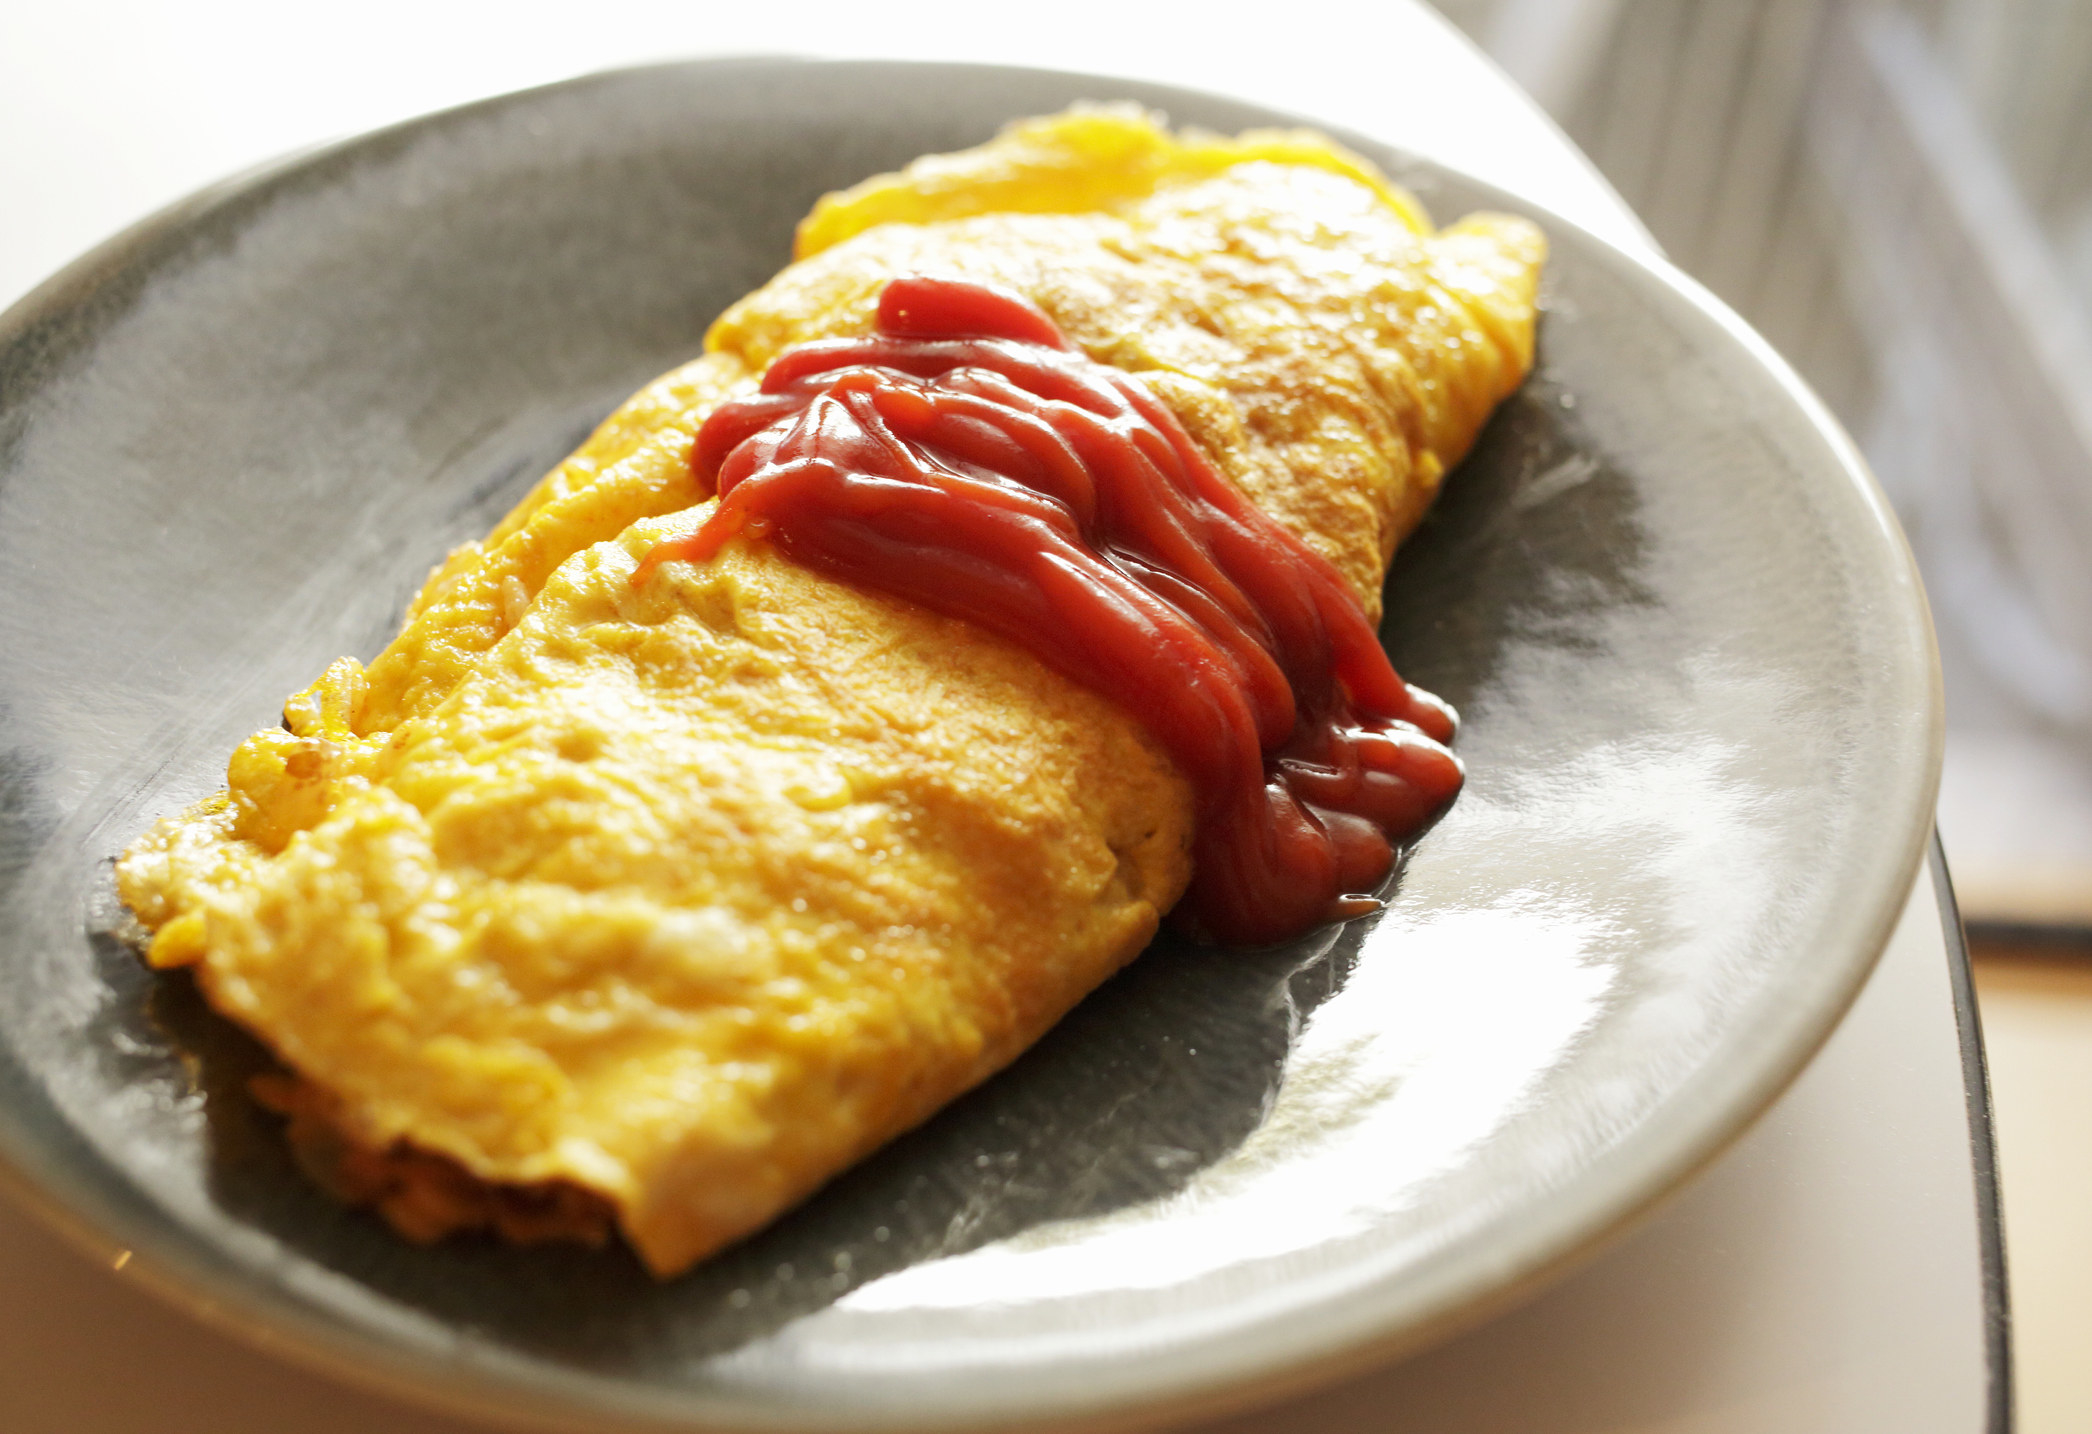 An omelet with ketchup.